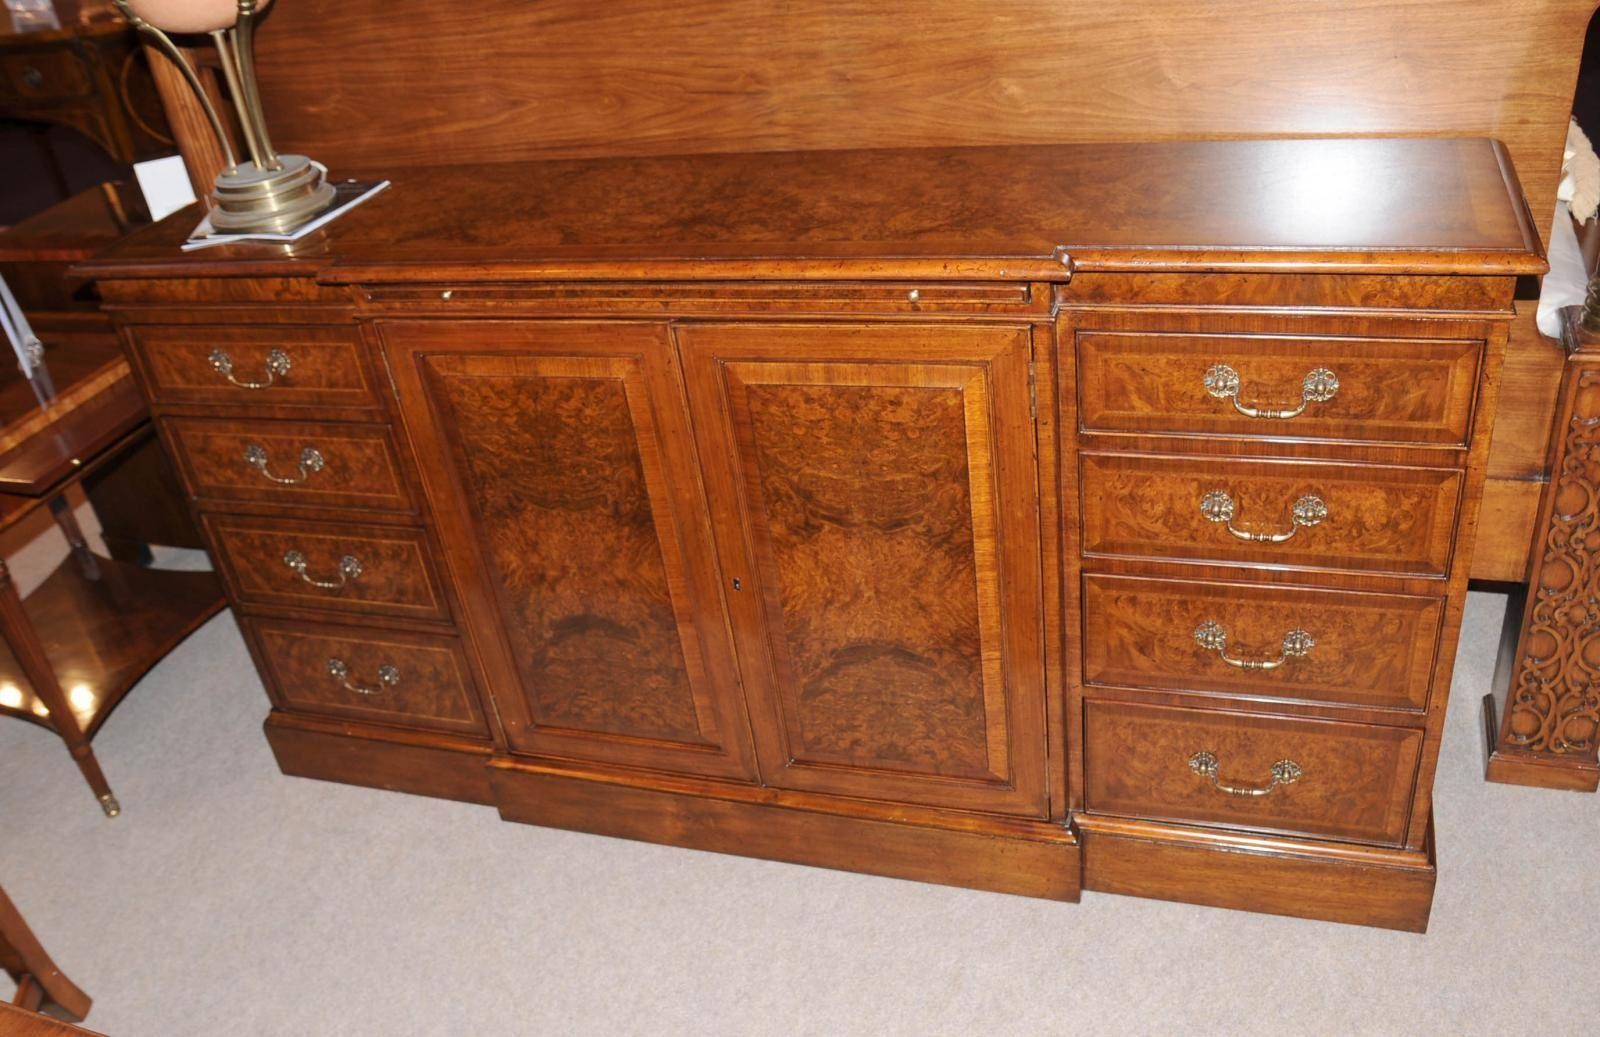 Edwardian Walnut Sideboard Buffet Server Dining Furniture | Ebay With Latest Server Sideboard Furniture (View 4 of 15)